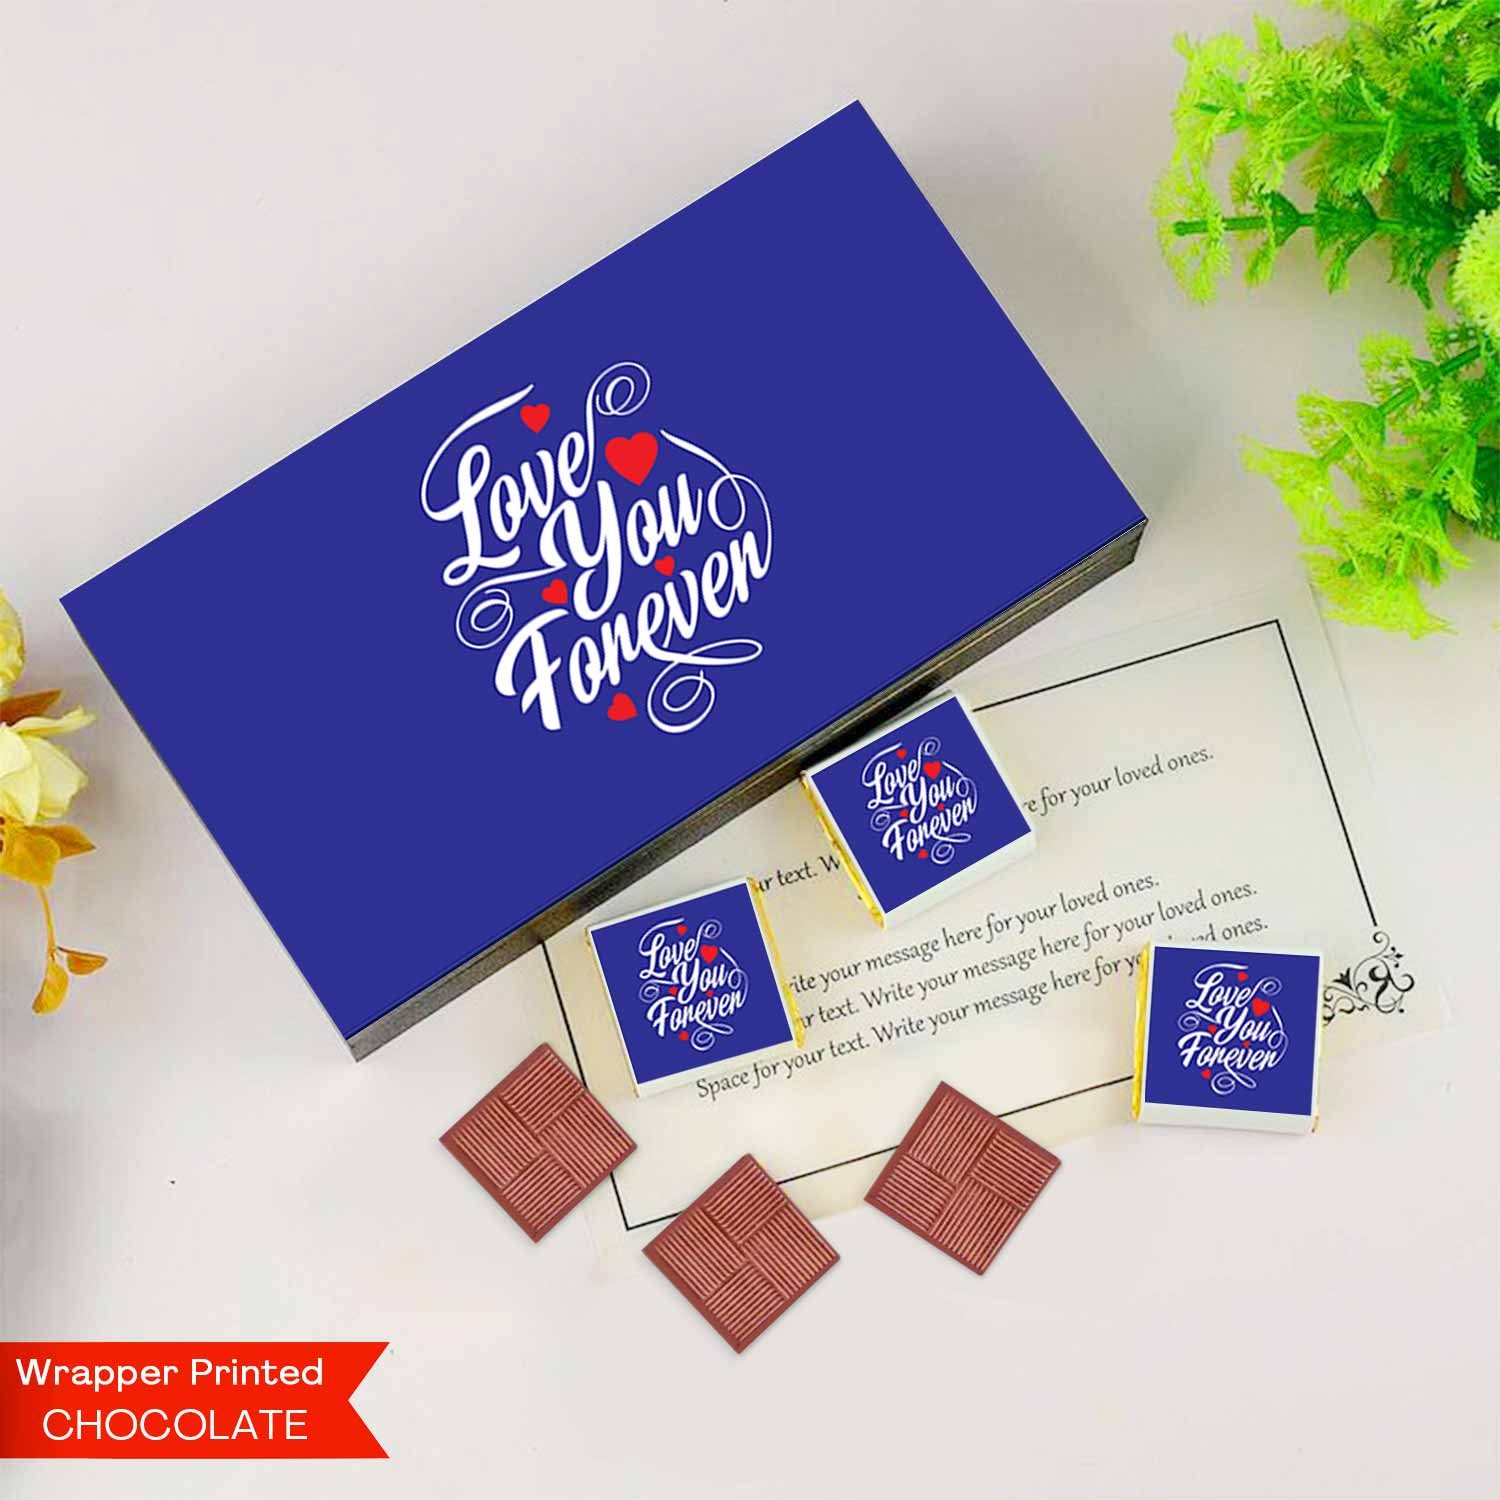 design your own chocolate bar wrapper online printed chocolate wrappers custom printed chocolate personalised chocolate wrappers personalised chocolates with names personalised chocolate wrappers near me words for chocolate lovers